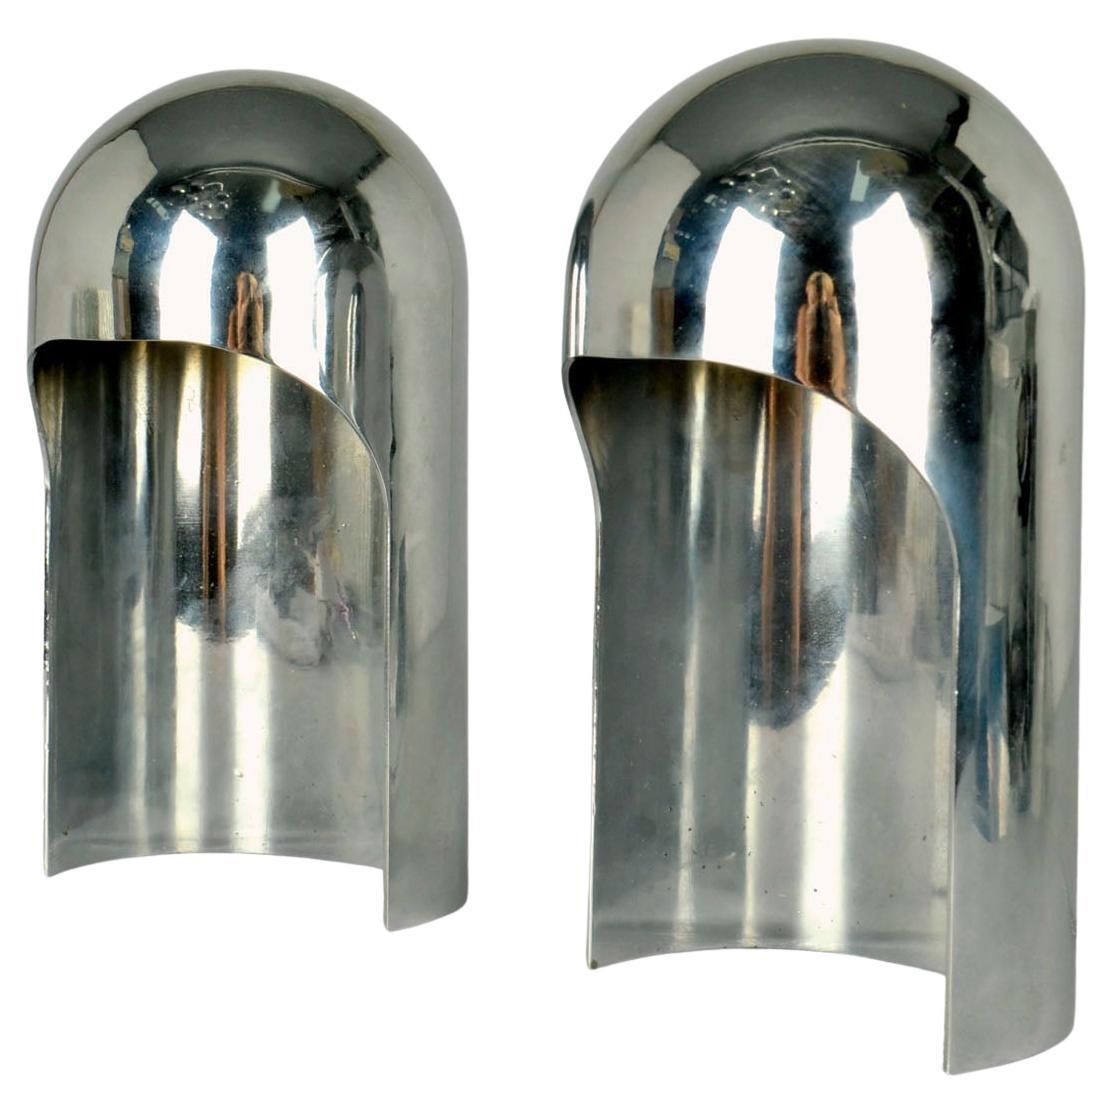 Pair of Minimal polished aluminum dome table lamps, Italy 1960's. These self-supporting hooded structures resembles the curved hollow upper half of a sphere. The sculptural arch shaped lamps are cast in one piece and stand on a curved base. The form